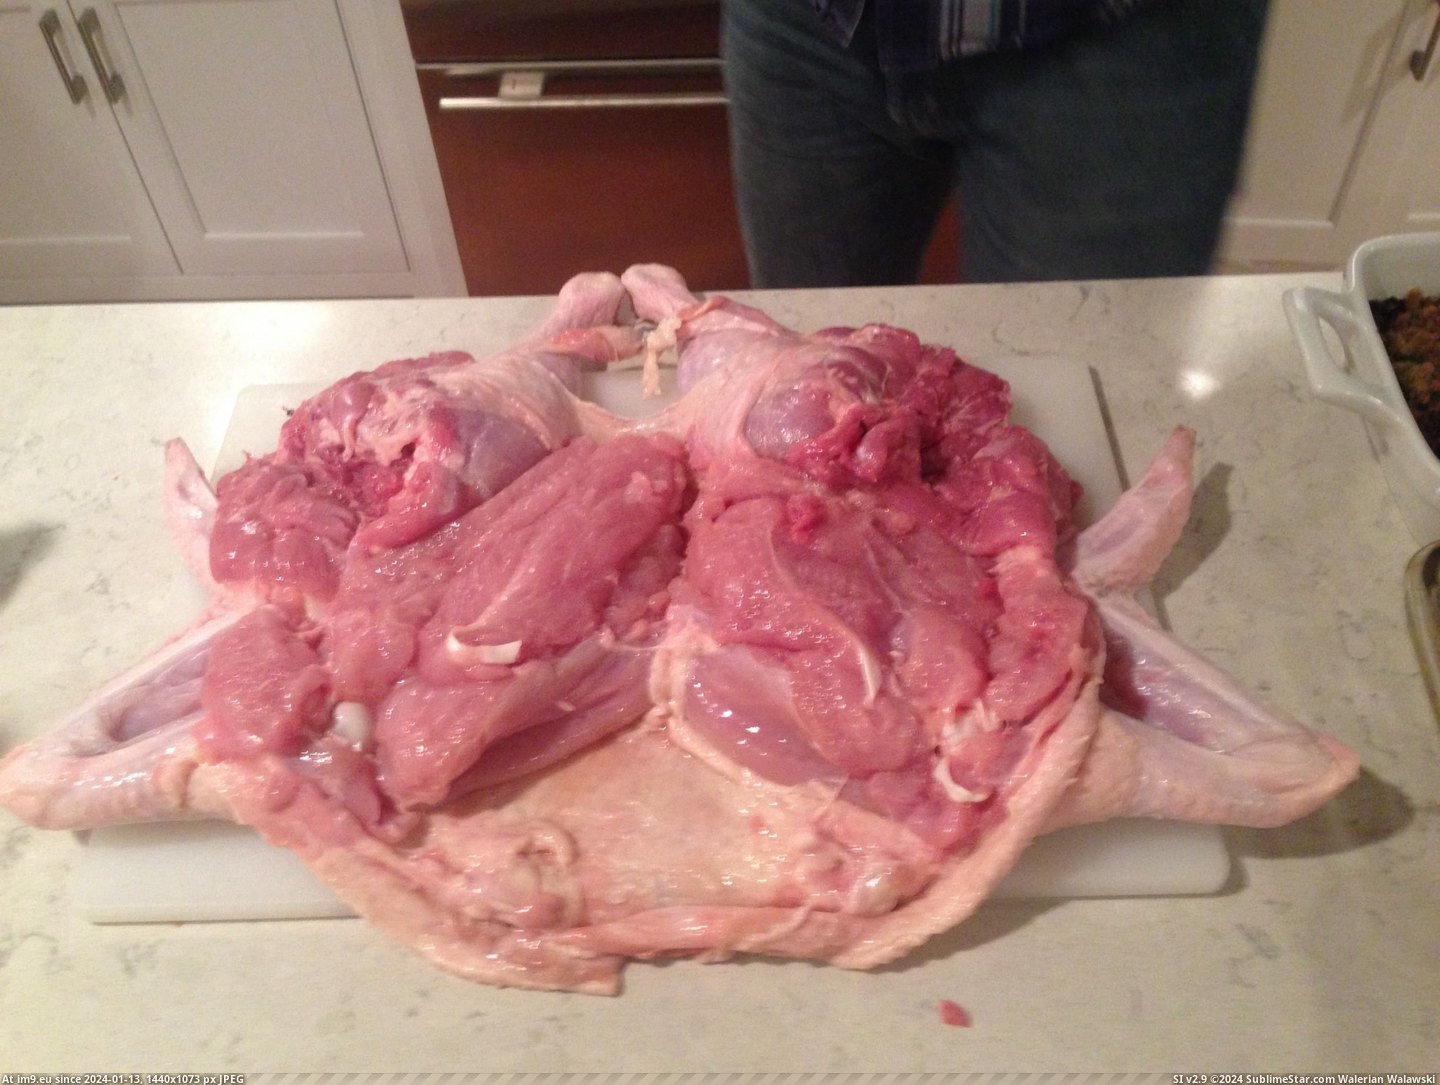 #For #Year #Thought #Thanksgiving #Duck #Turkey #Turducken #Family #See #Chicken [Pics] My family makes turducken (a chicken in a duck in a turkey) every year for Thanksgiving. Thought reddit would like to see Pic. (Изображение из альбом My r/PICS favs))